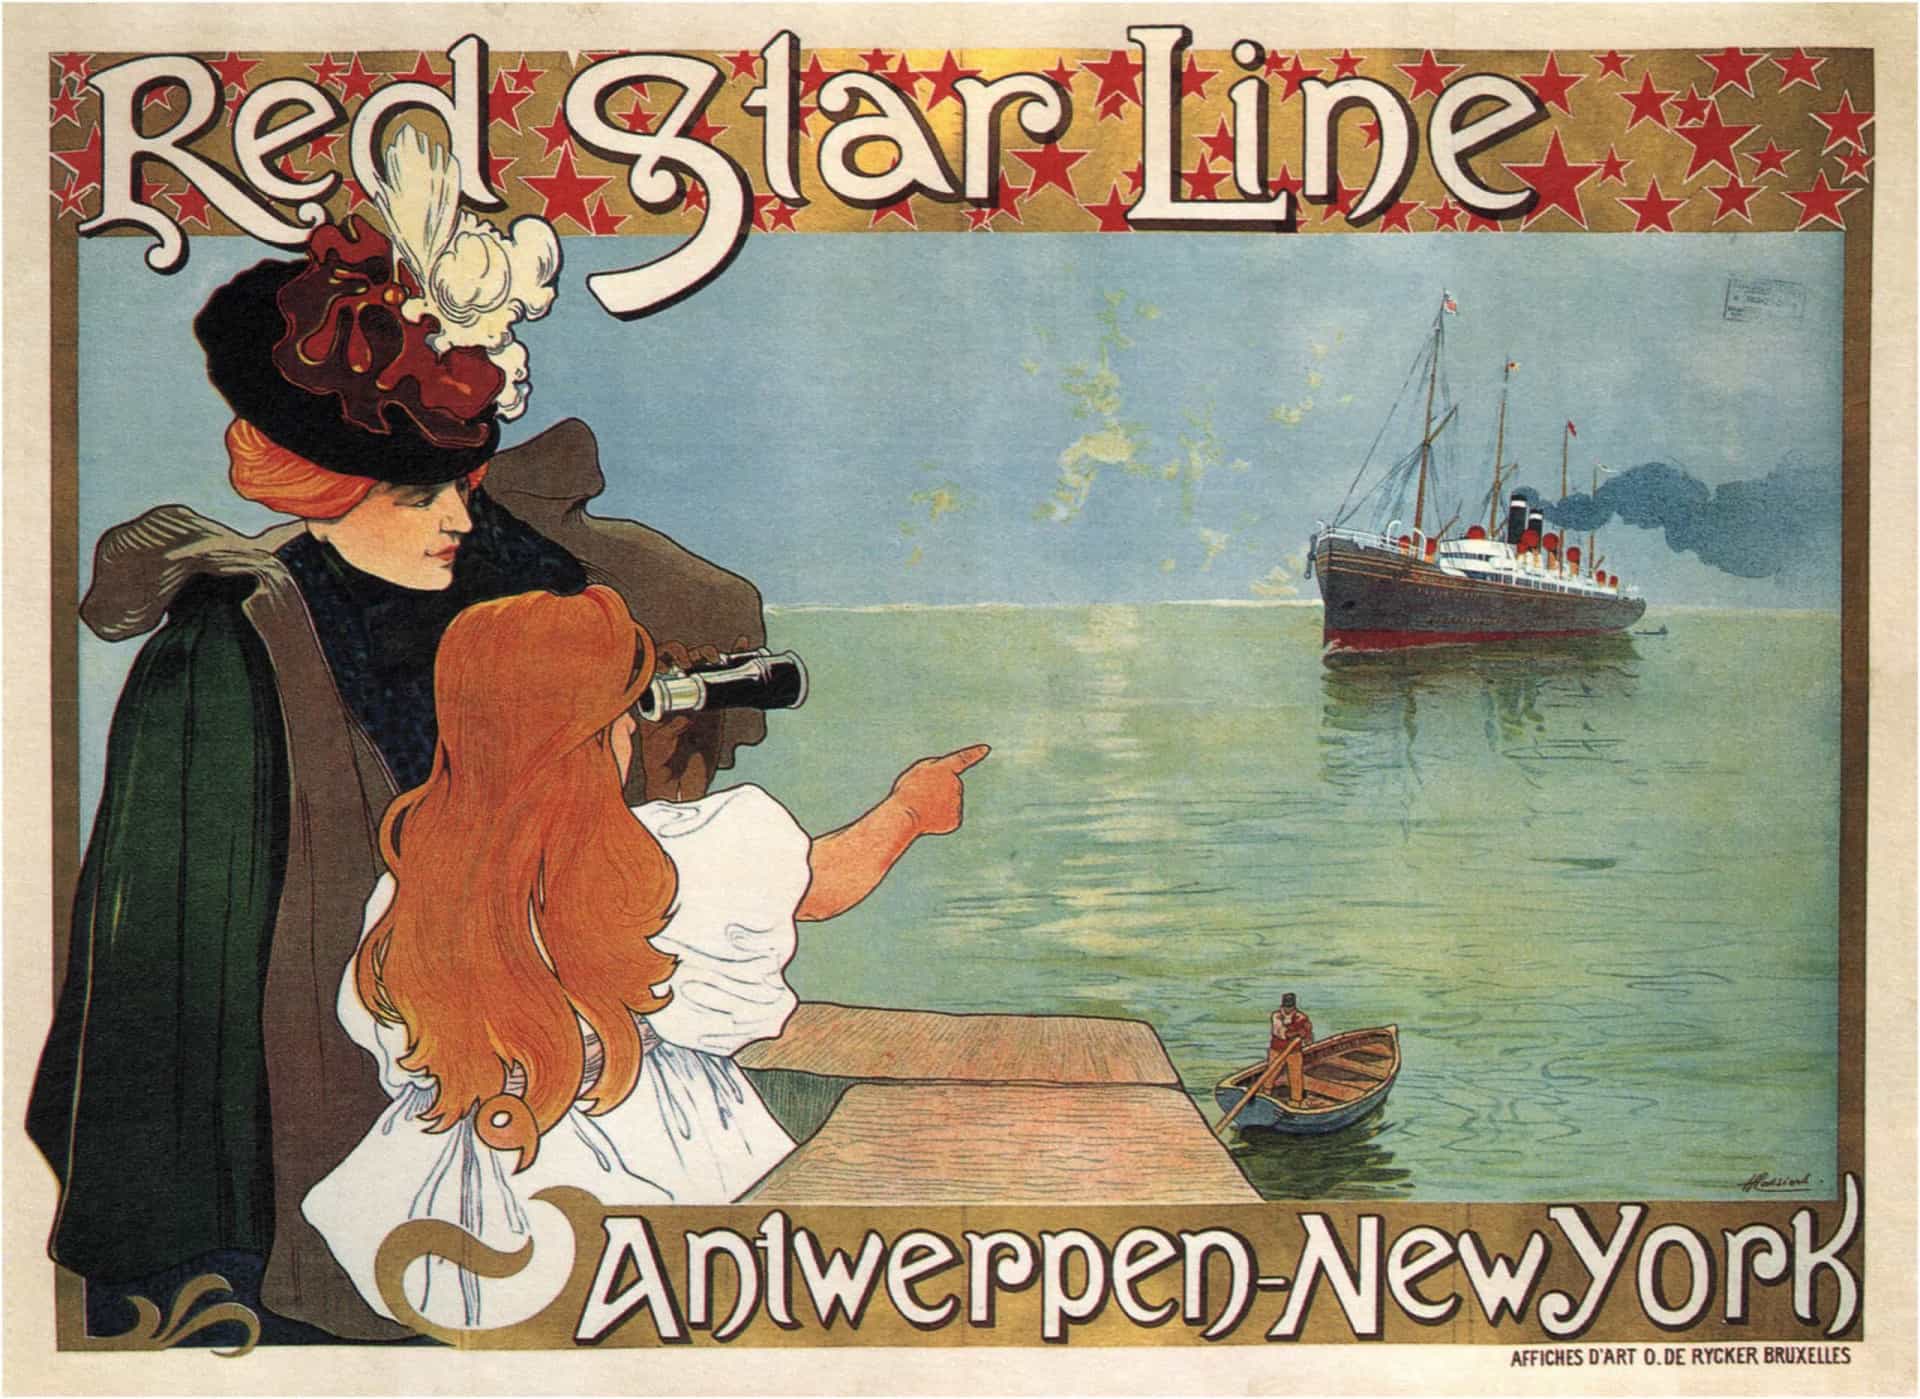 <p>The loss of the <em>Titanic</em> did little to dent the public's faith in the burgeoning cruise ship industry. Besides faster transatlantic crossings, passenger liner companies were expanding port of call choice. The Norwegian-American-owned Red Star Line, for example, listed its main ports of call as Antwerp in Belgium, Liverpool and Southampton in the United Kingdom, and New York City and Philadelphia in the United States.</p><p><a href="https://www.msn.com/en-za/community/channel/vid-7xx8mnucu55yw63we9va2gwr7uihbxwc68fxqp25x6tg4ftibpra?cvid=94631541bc0f4f89bfd59158d696ad7e">Follow us and access great exclusive content every day</a></p>